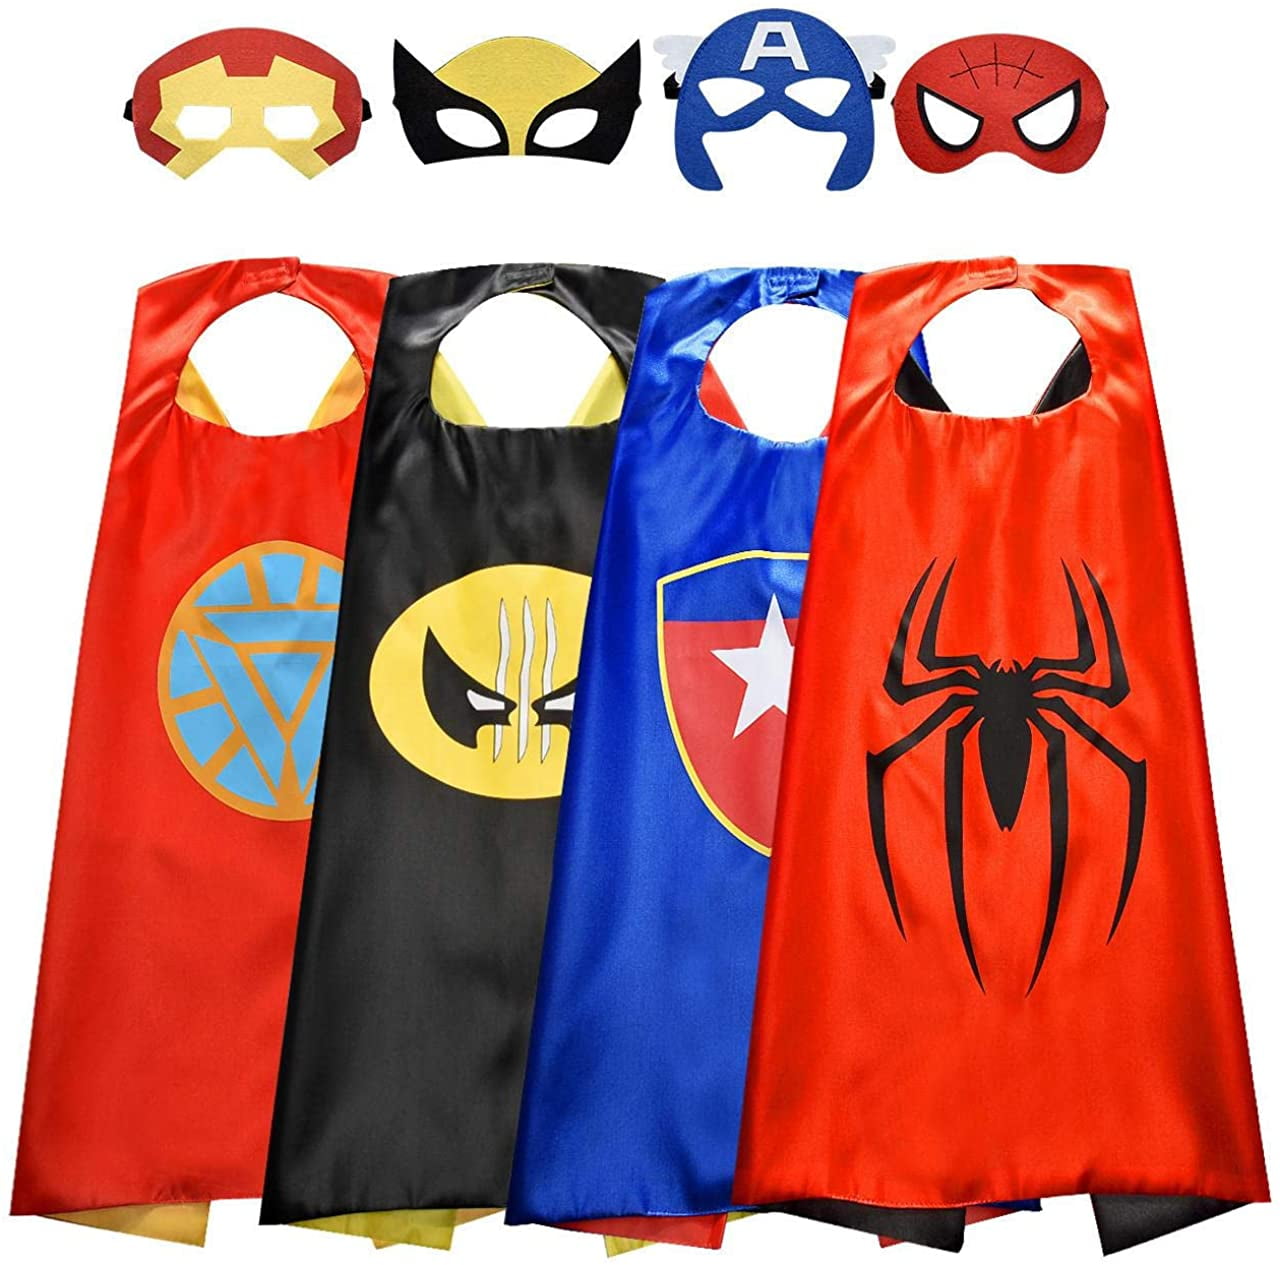 COTATERO Kids Dress Up Superhero Capes Sets & Slap Bracelets for Girl Children Costumes Halloween Birthday Gifts Party 